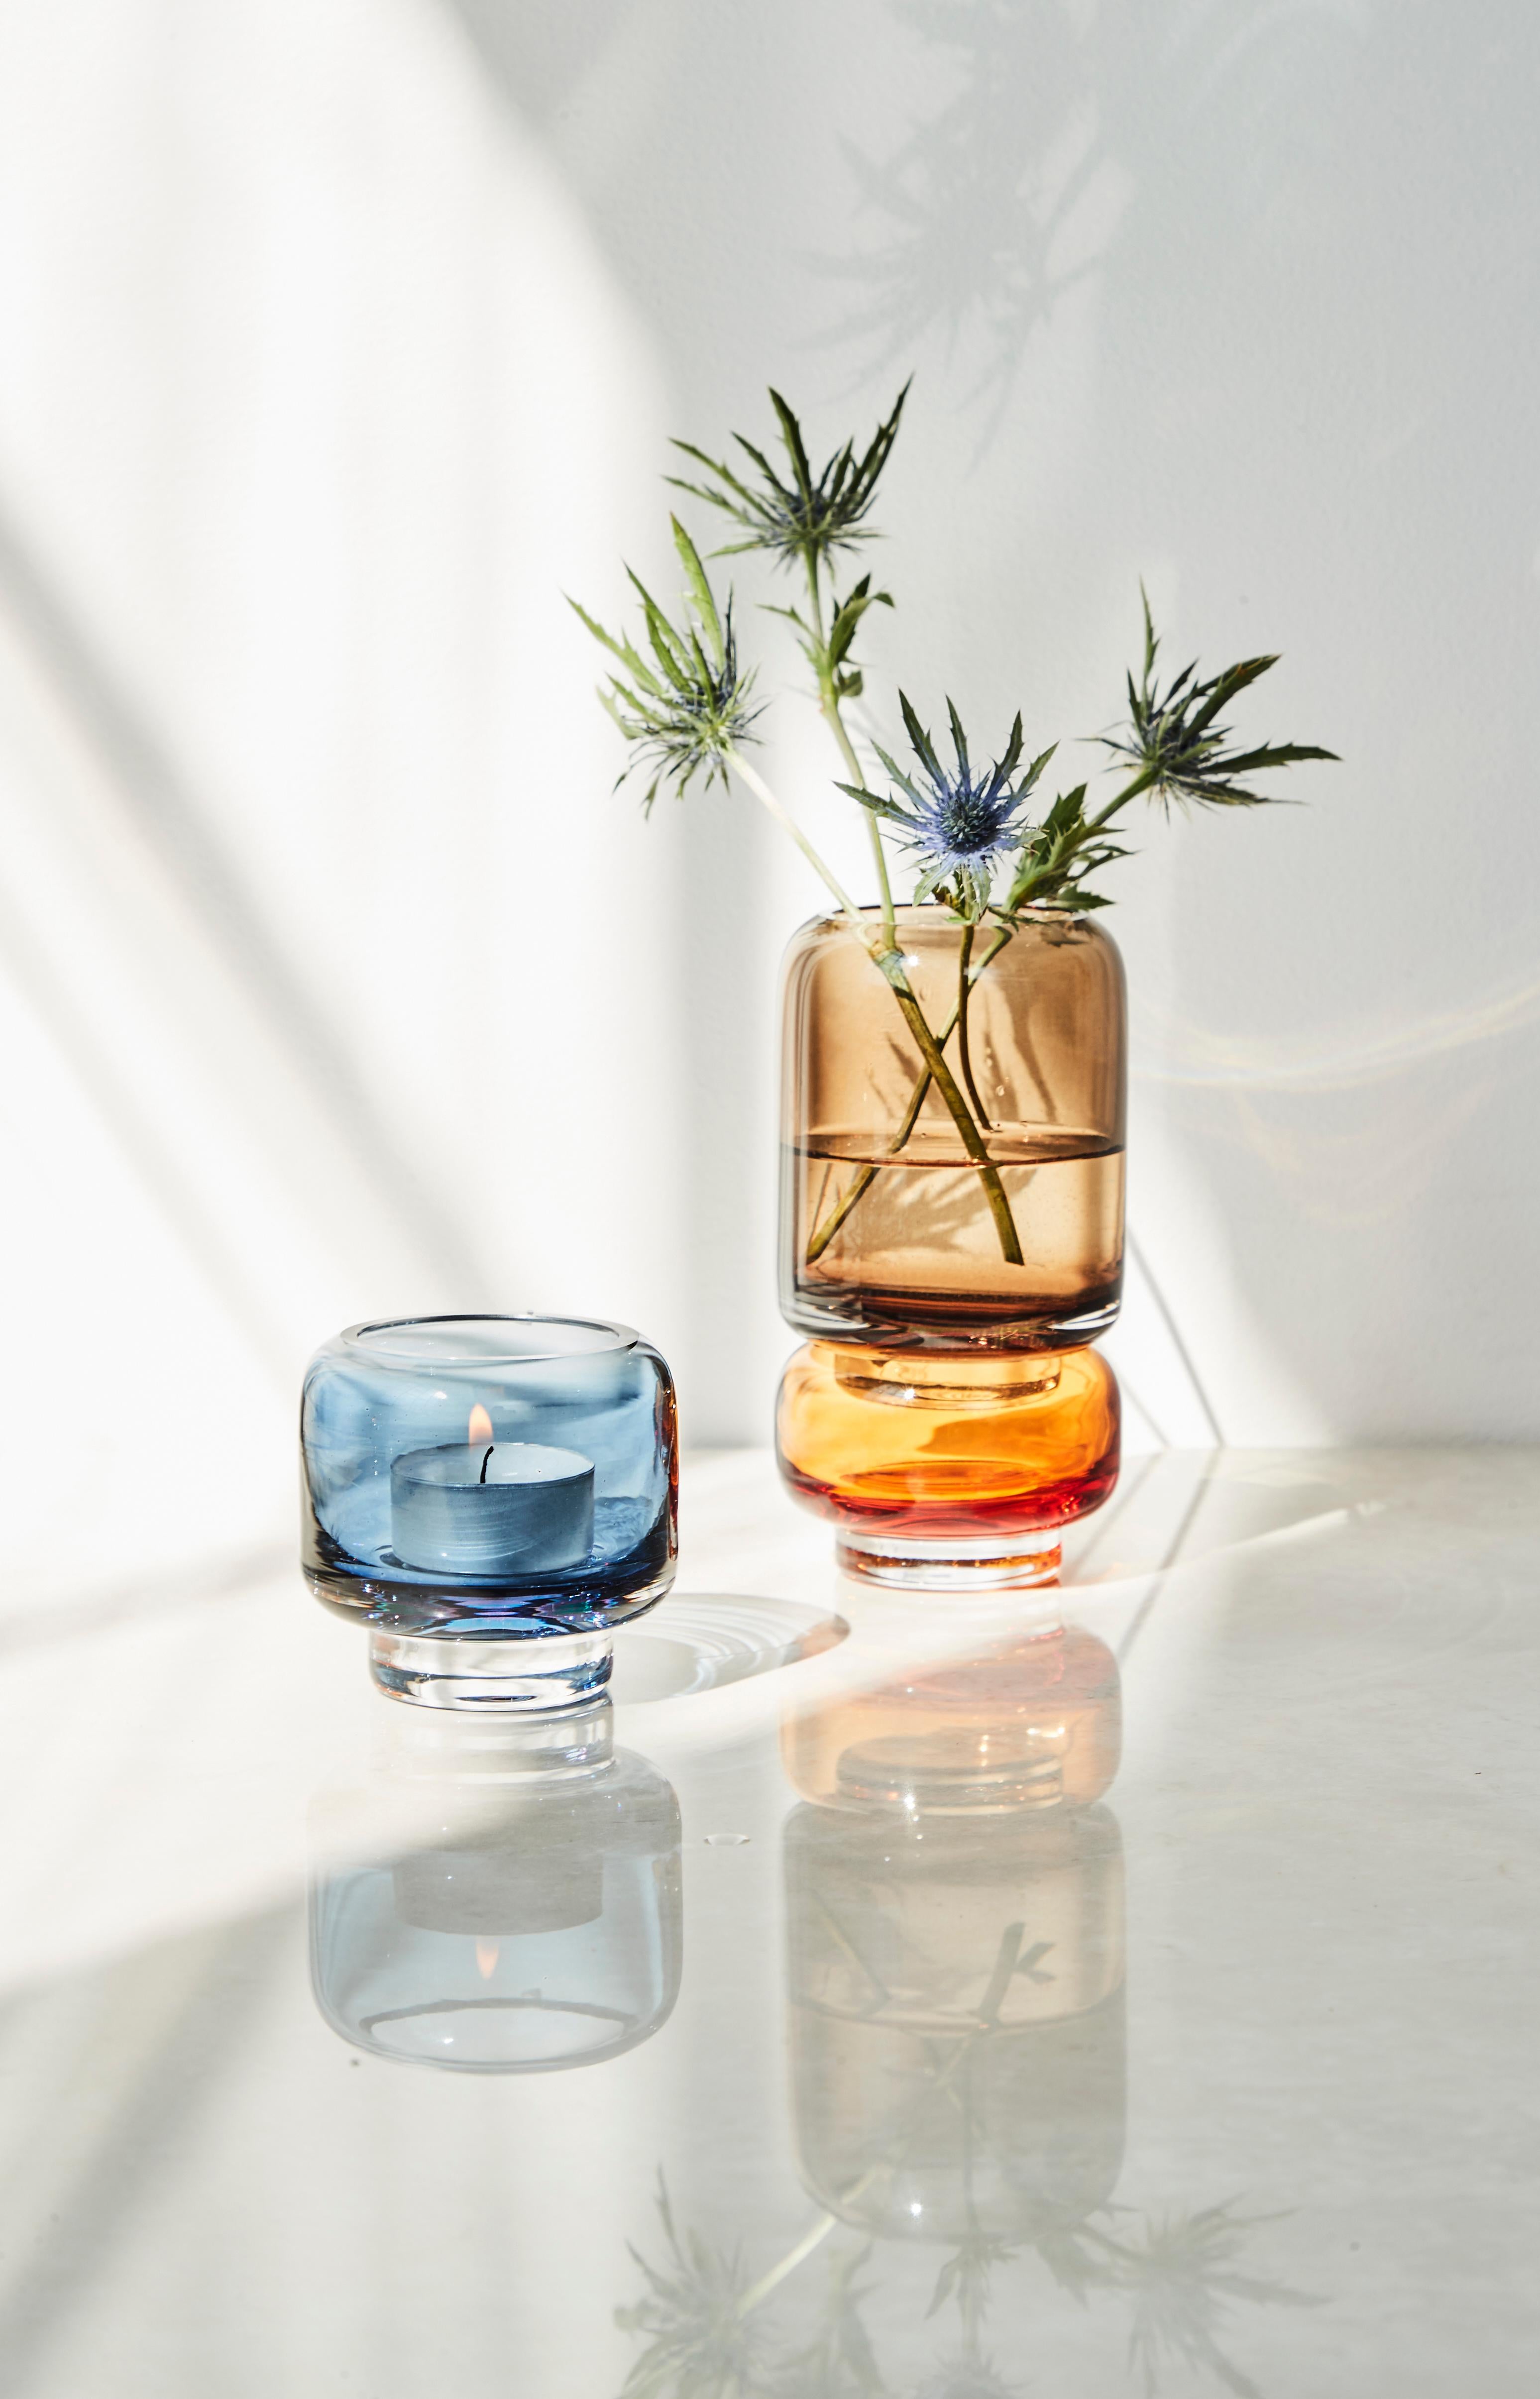 Stack Vase, by Studio Føy from Warm Nordic 7